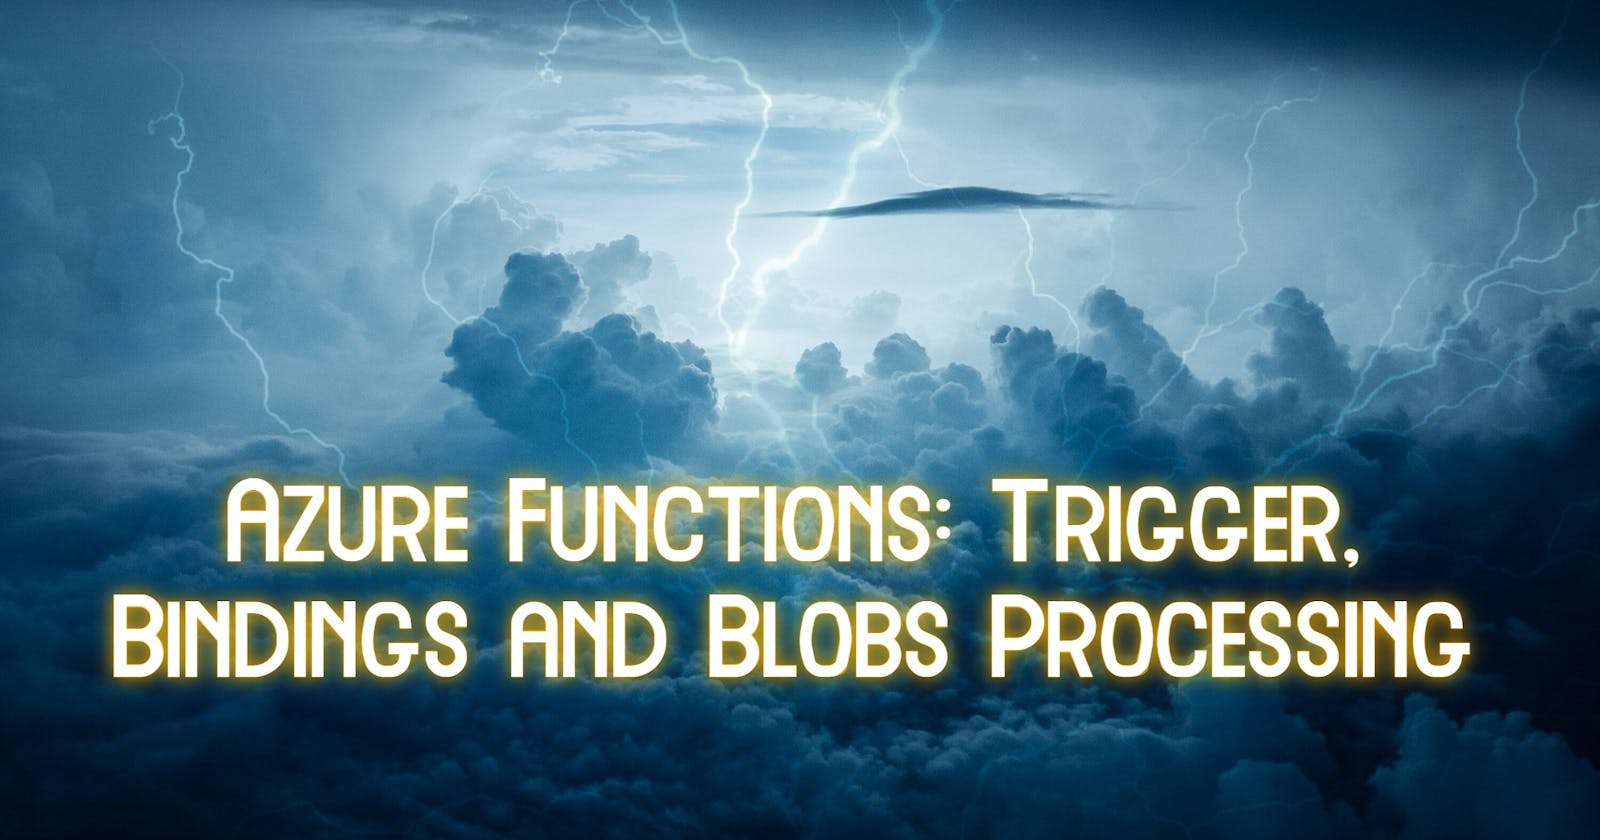 Azure Functions: Trigger, Bindings and Blobs Processing